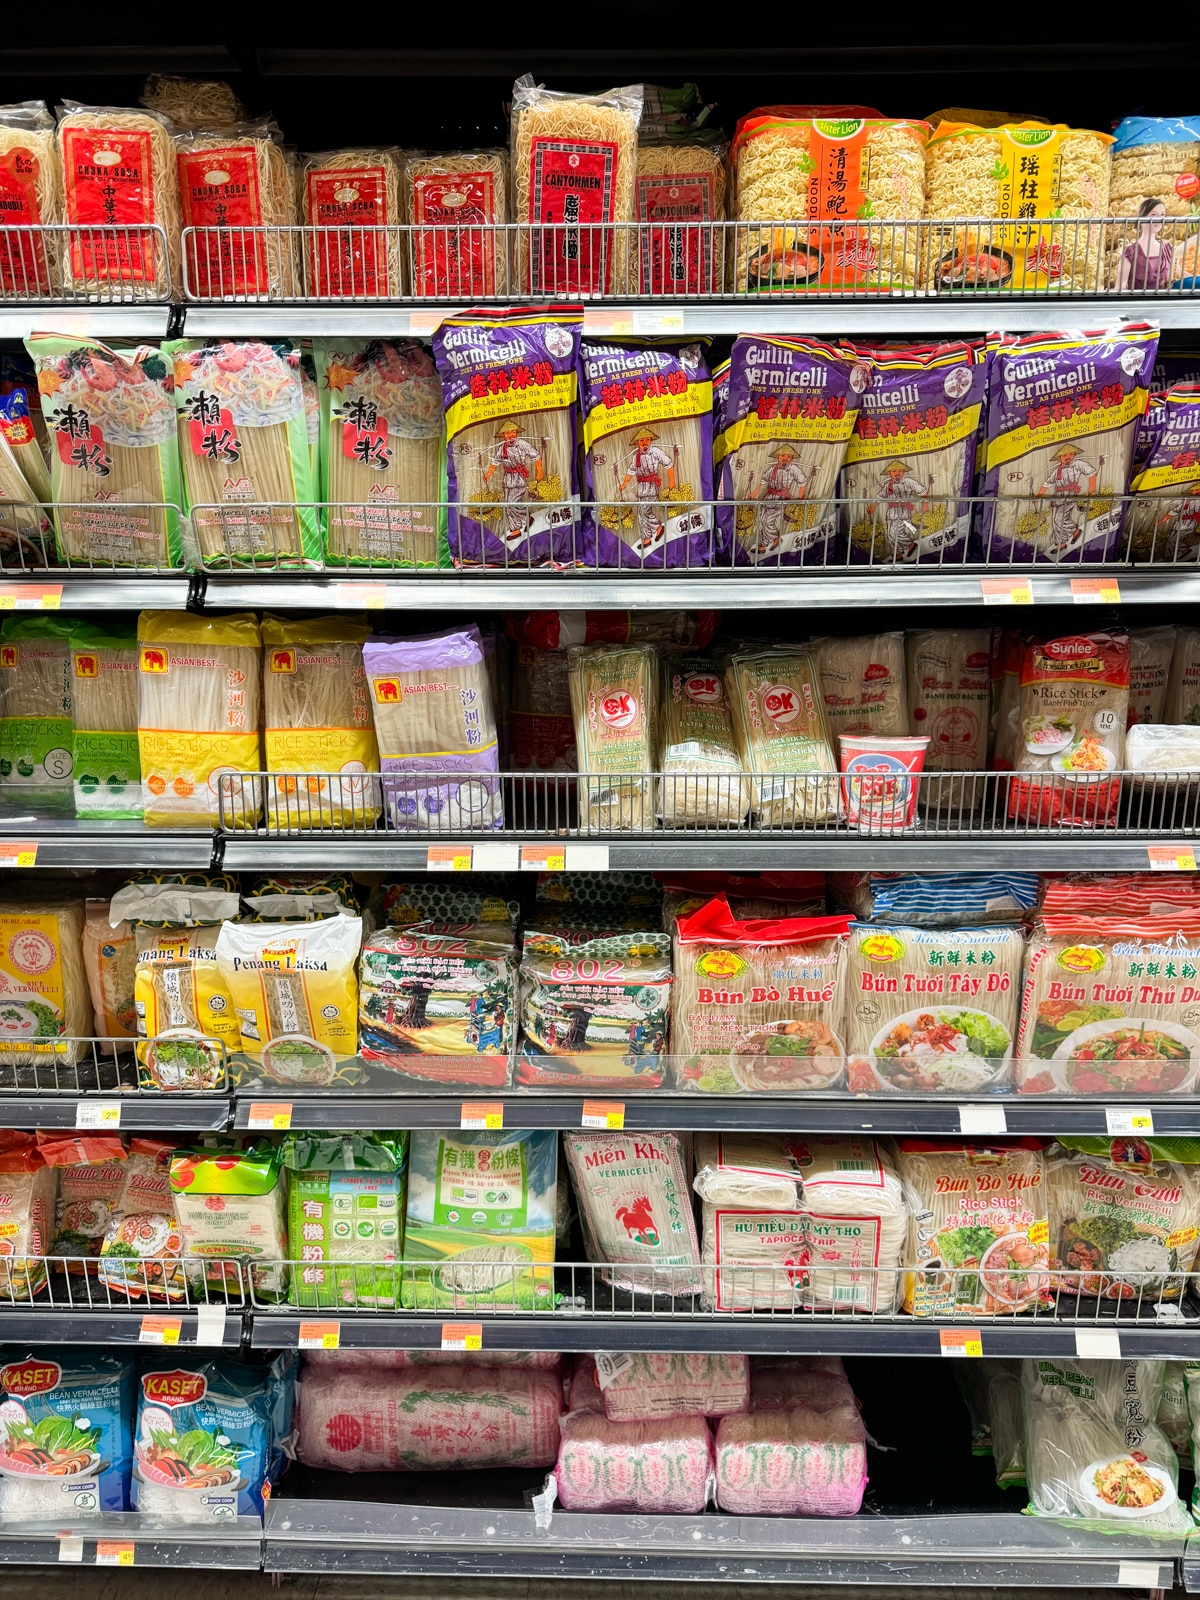 Stacked shelves filled with packages of rice noodles in various sizes.